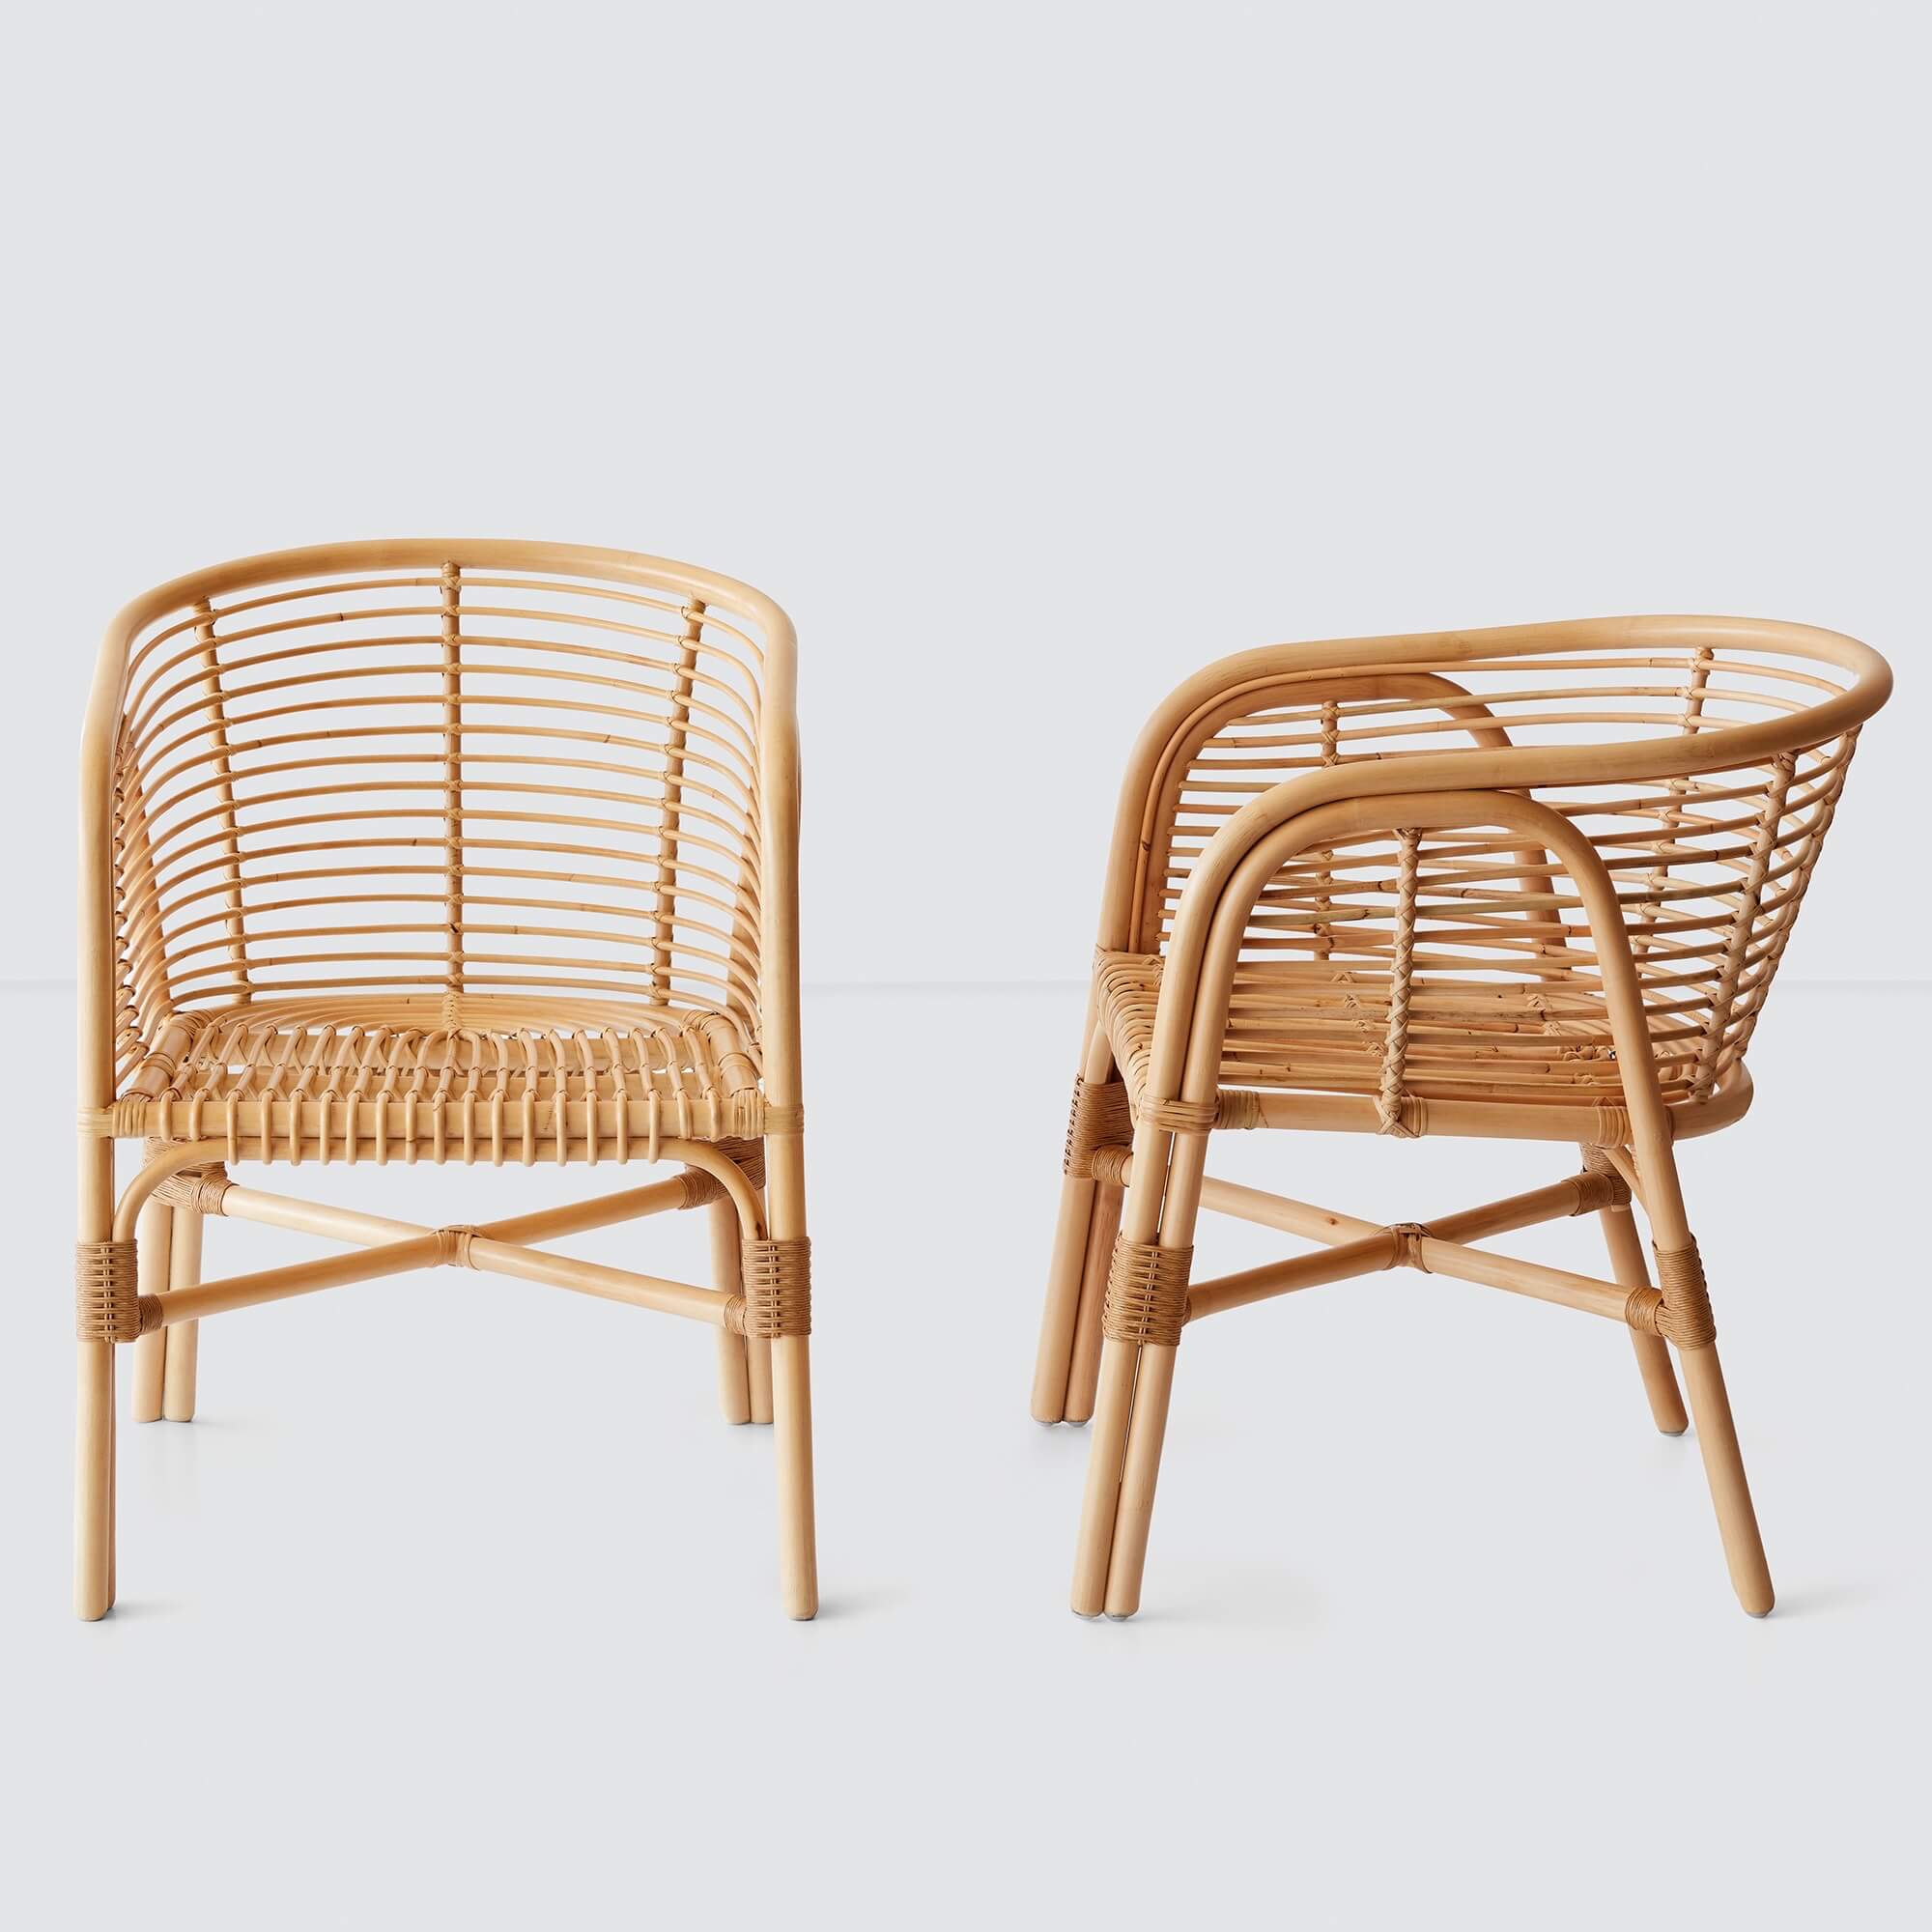 Lombok Rattan Lounge Chair The Citizenry